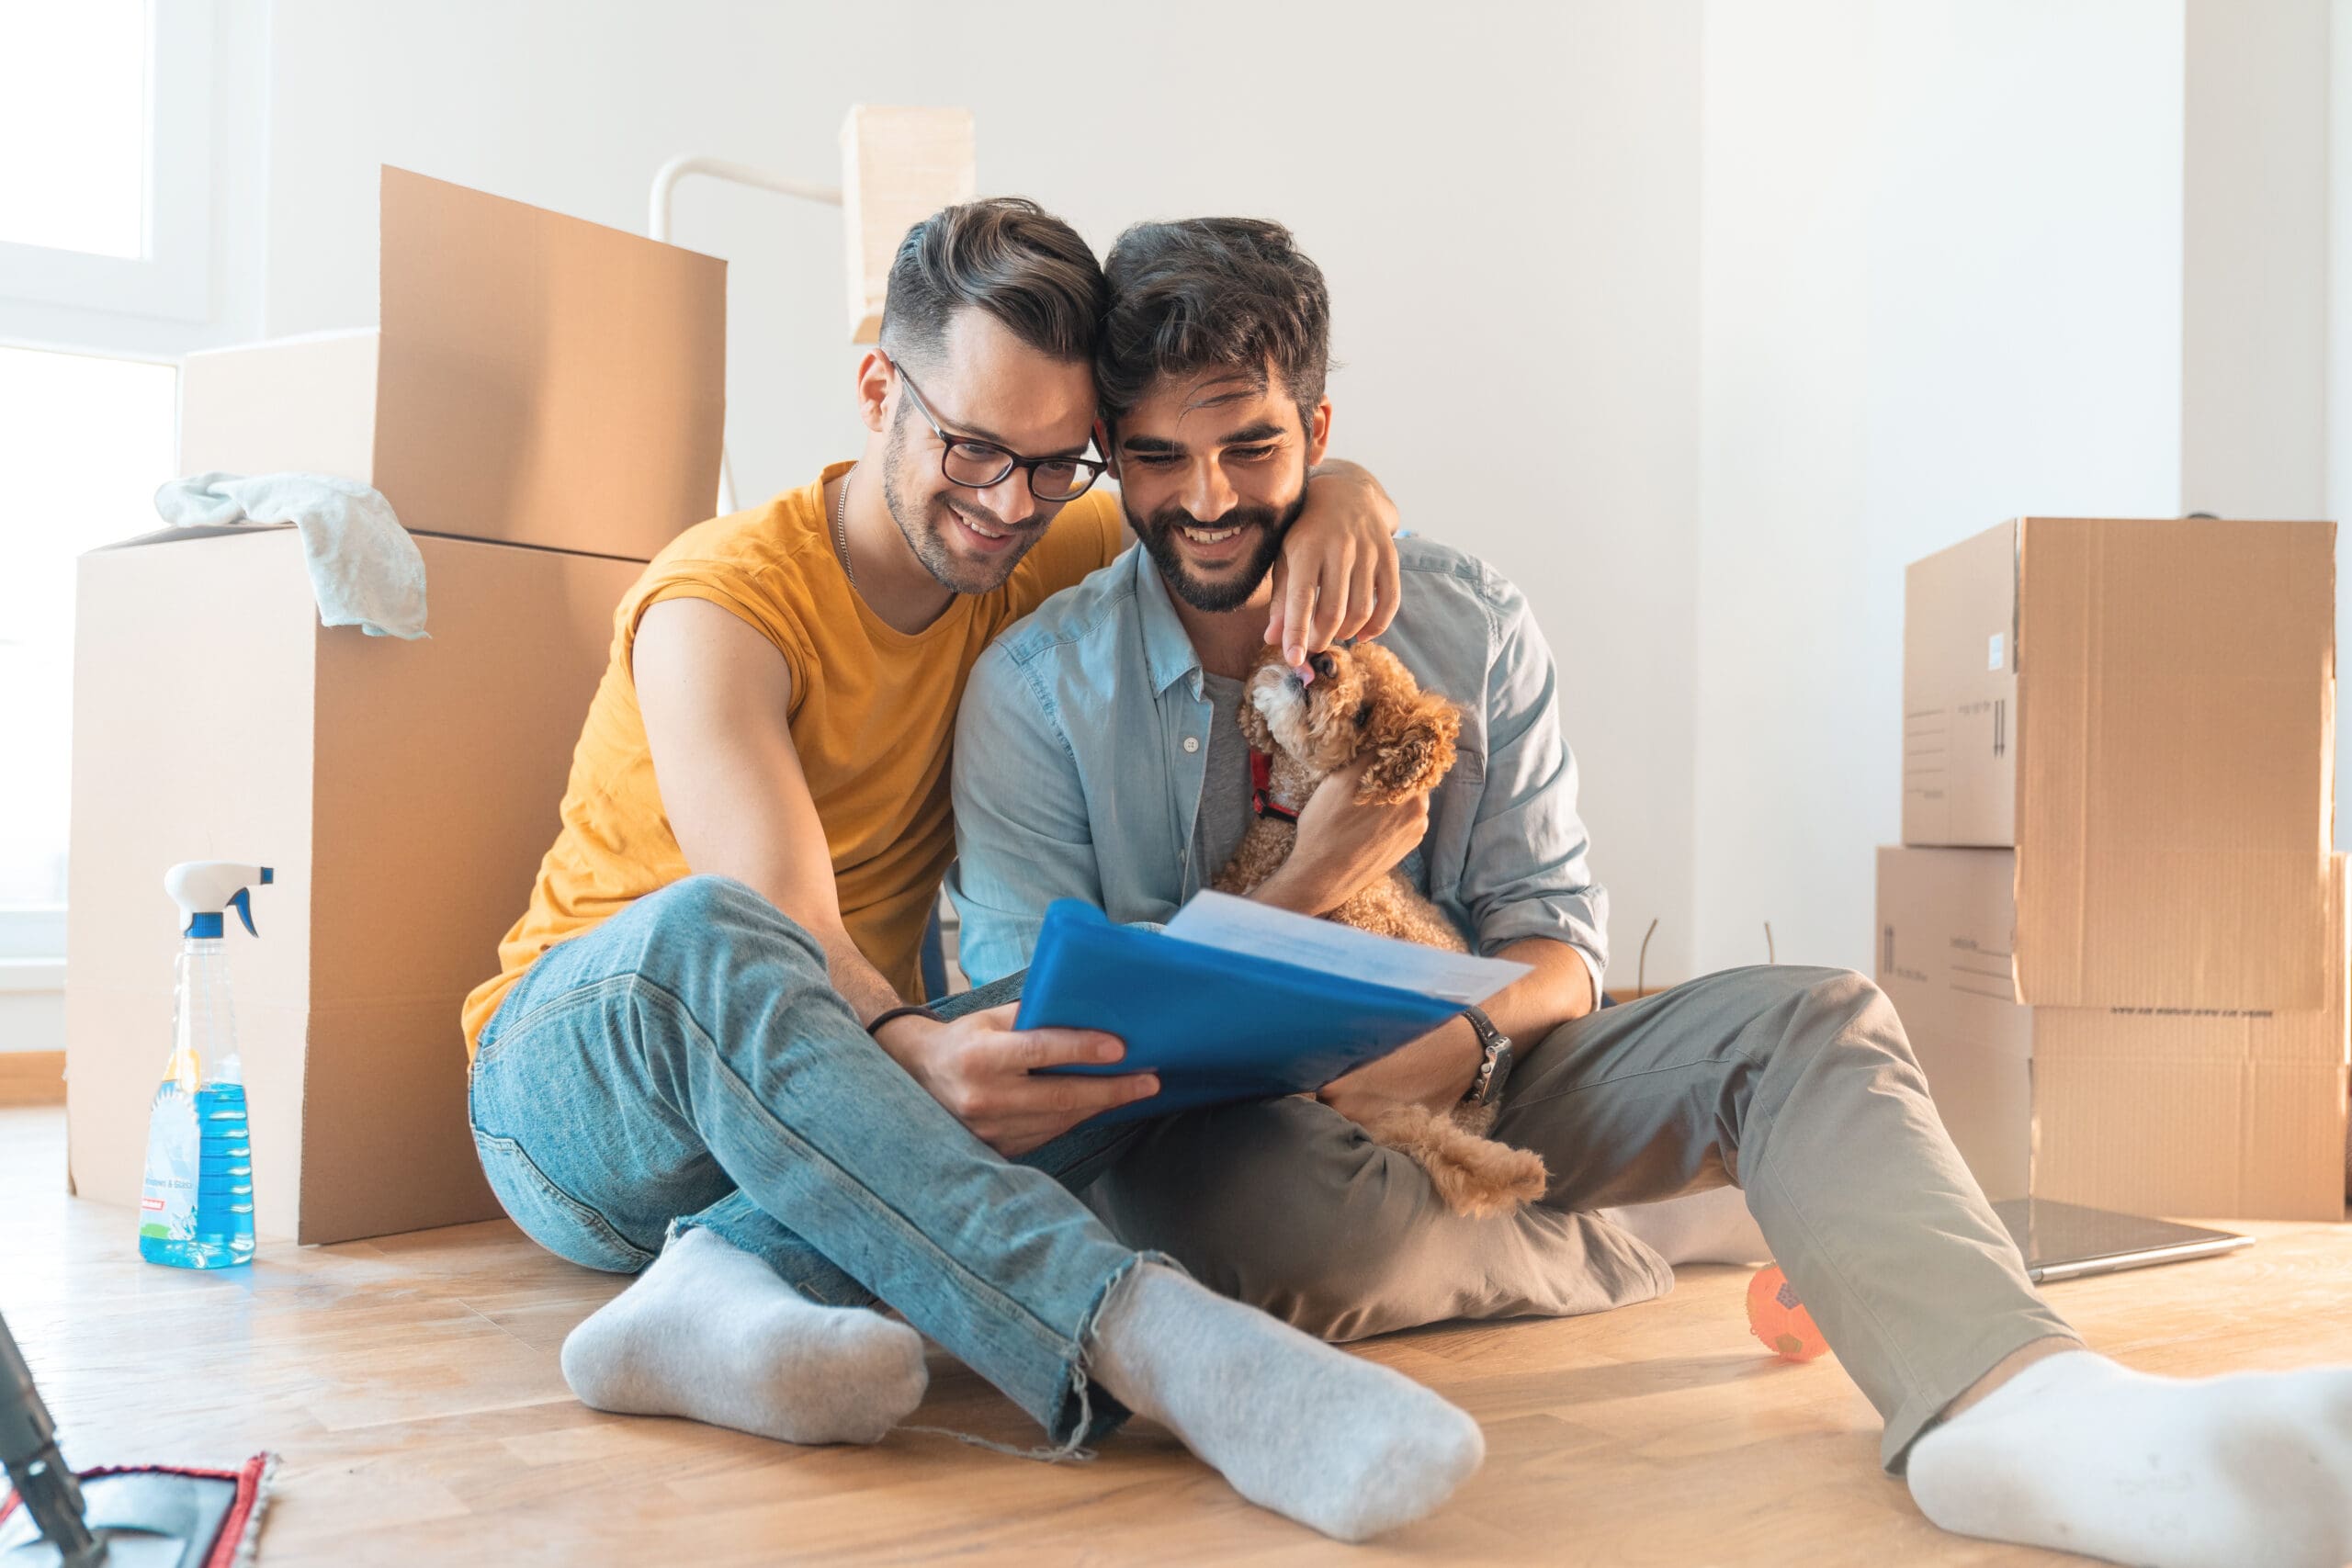 Happy gay couple smiling while cuddling dog and reading documents surrounded by cardboard boxes. Couple going through paperwork making financial plan together.